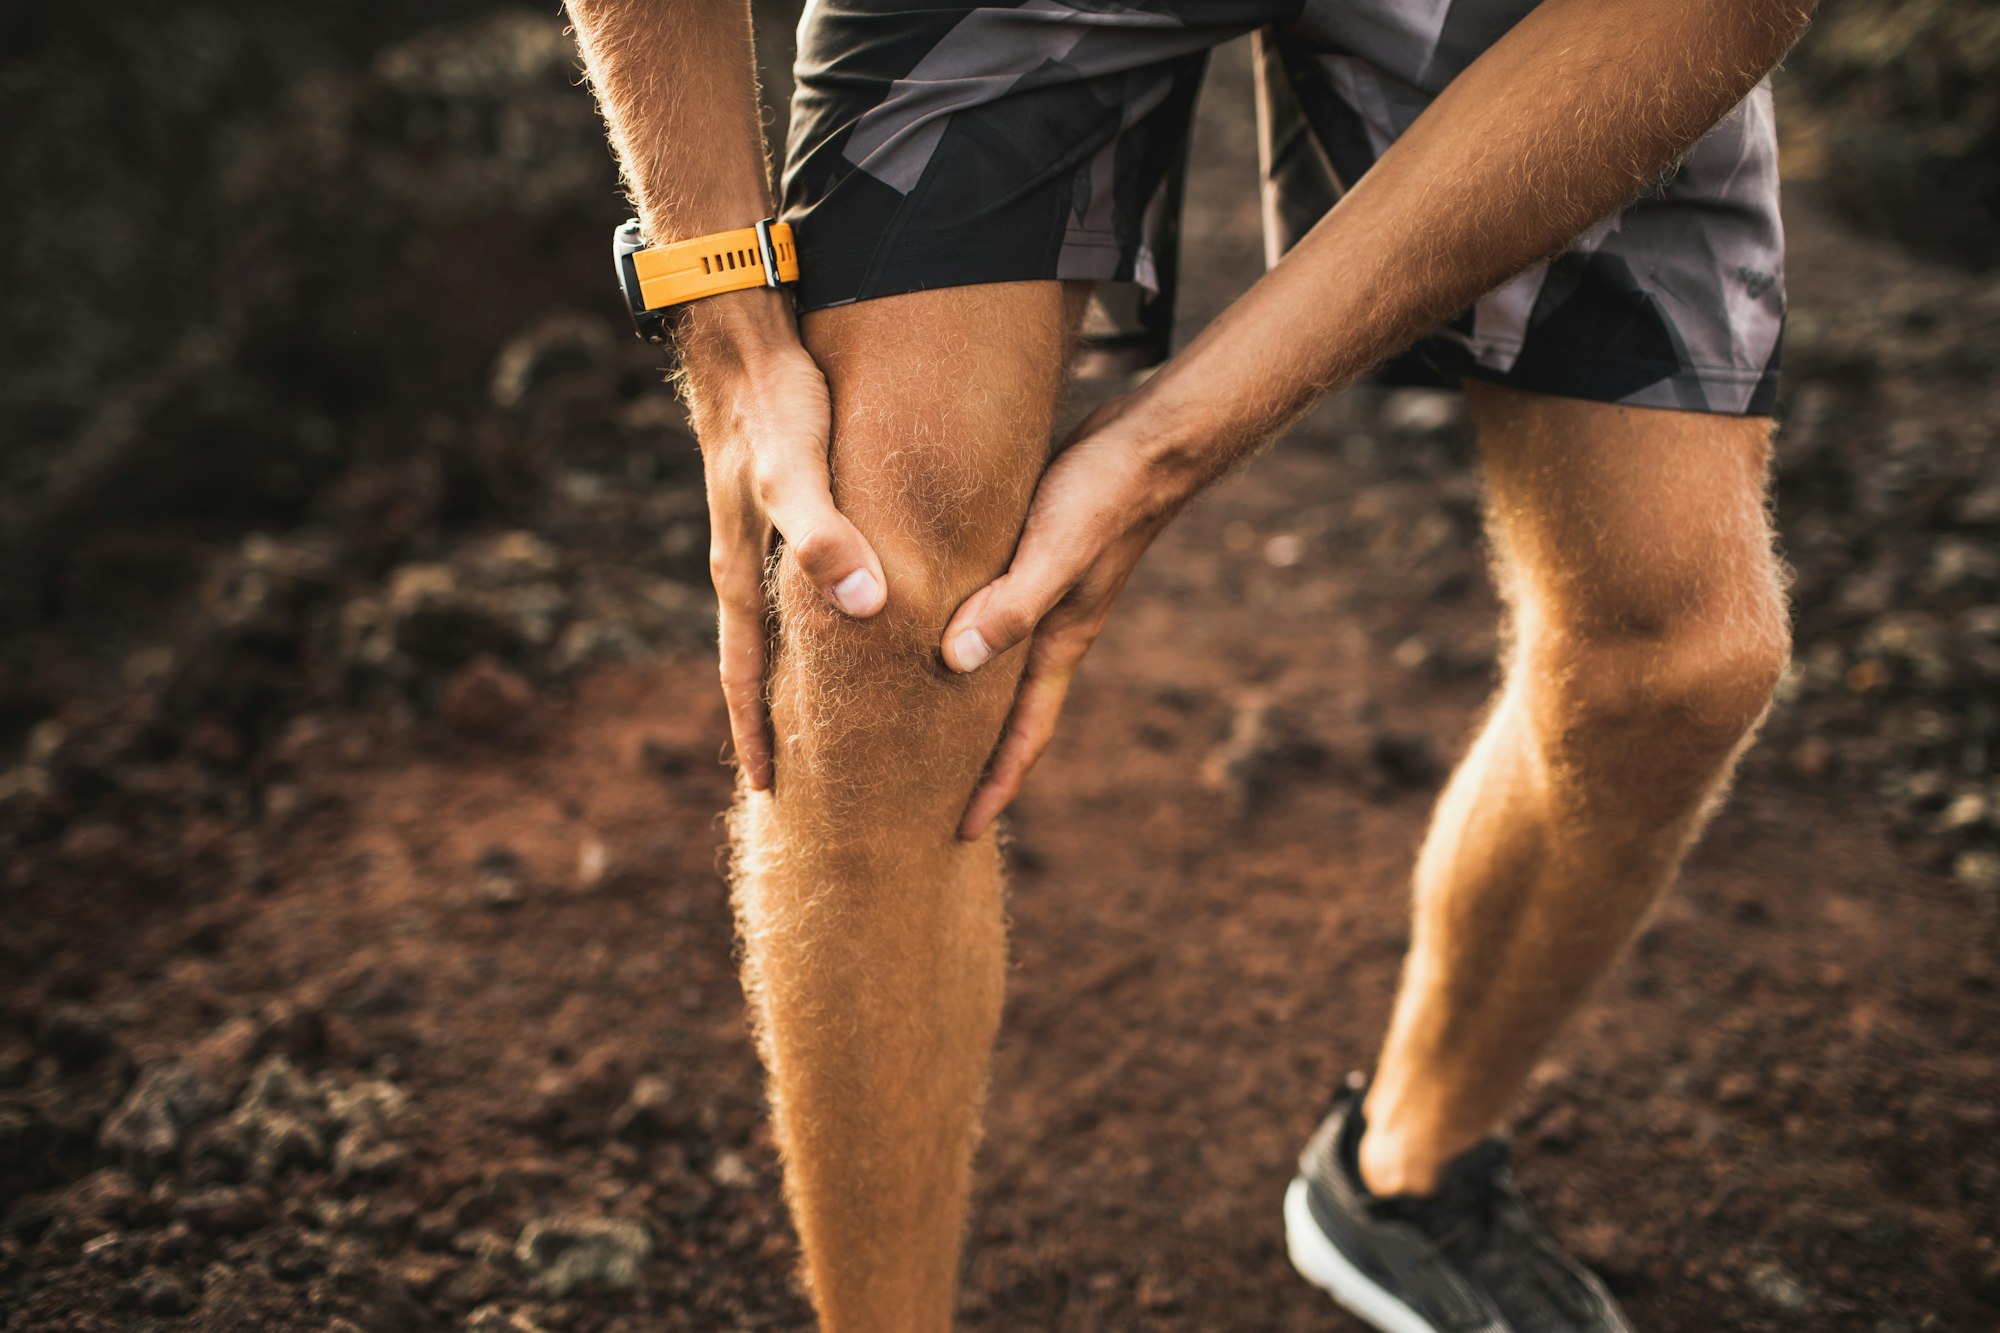 Knee injury on running outdoors. Man holding knee by hands close-up and suffering with pain